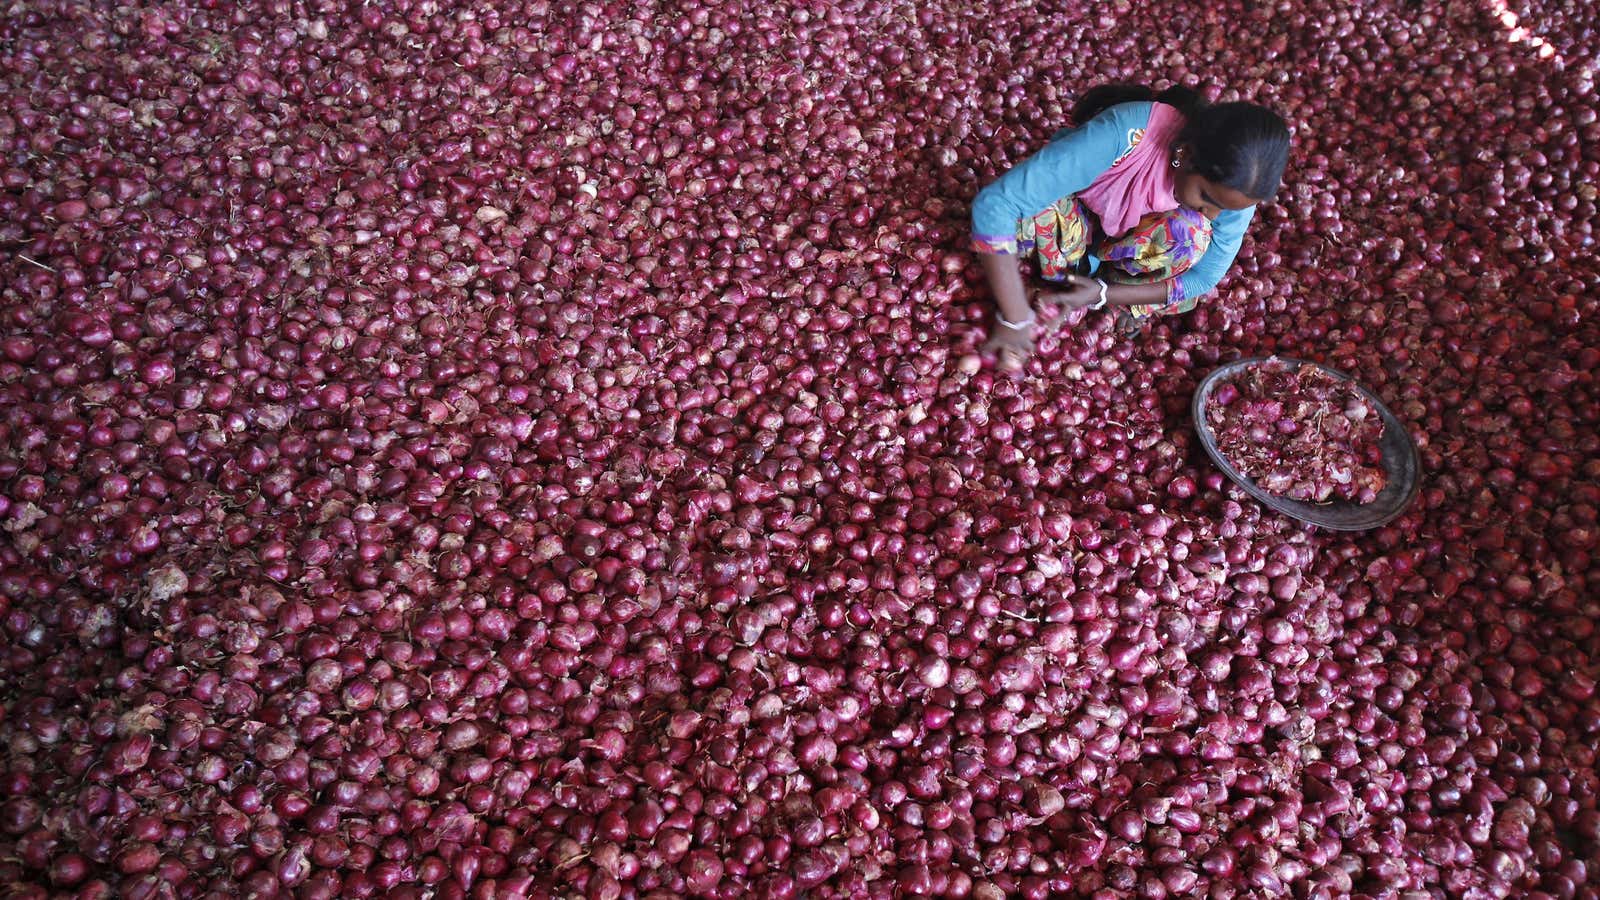 India’s onion crisis is because of its laws.